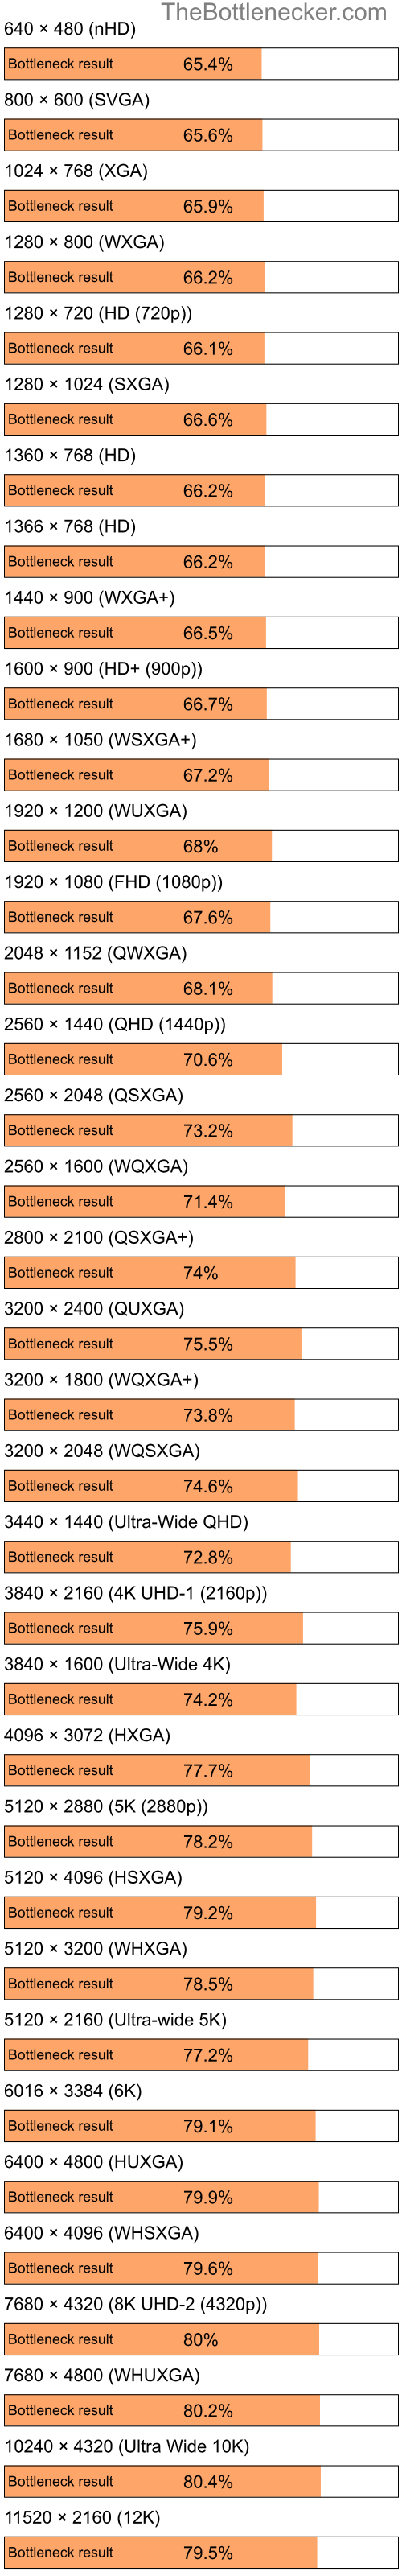 Bottleneck results by resolution for Intel Pentium 4 and AMD Mobility Radeon HD 2300 in Processor Intense Tasks